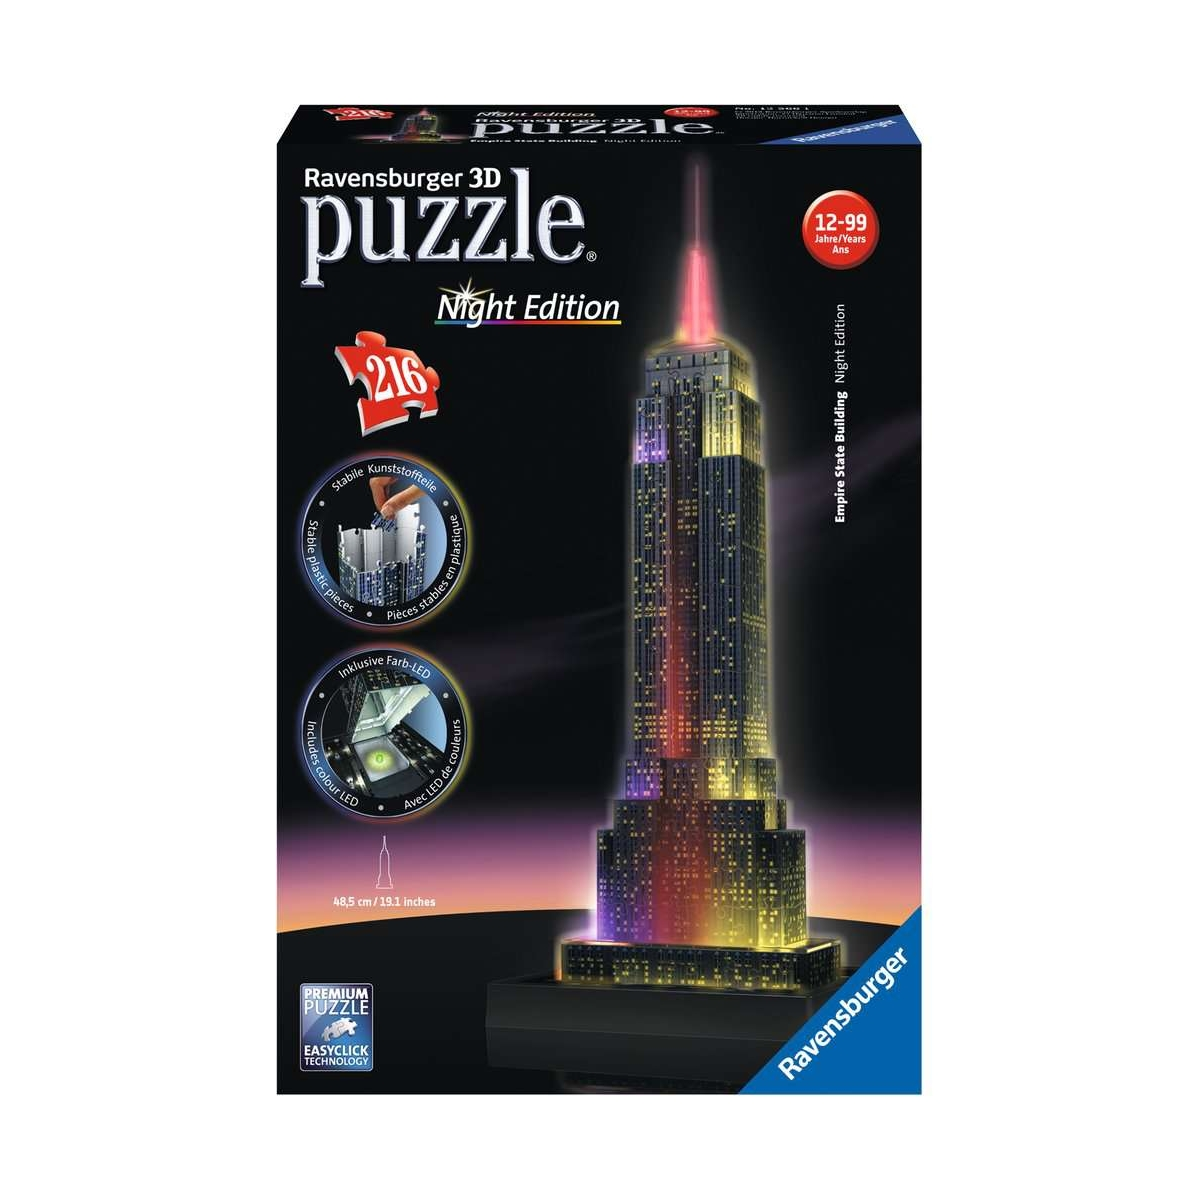 BEI NA 12566 BUILDING STATE EMPIRE RAVENSBURGER 3D Puzzle